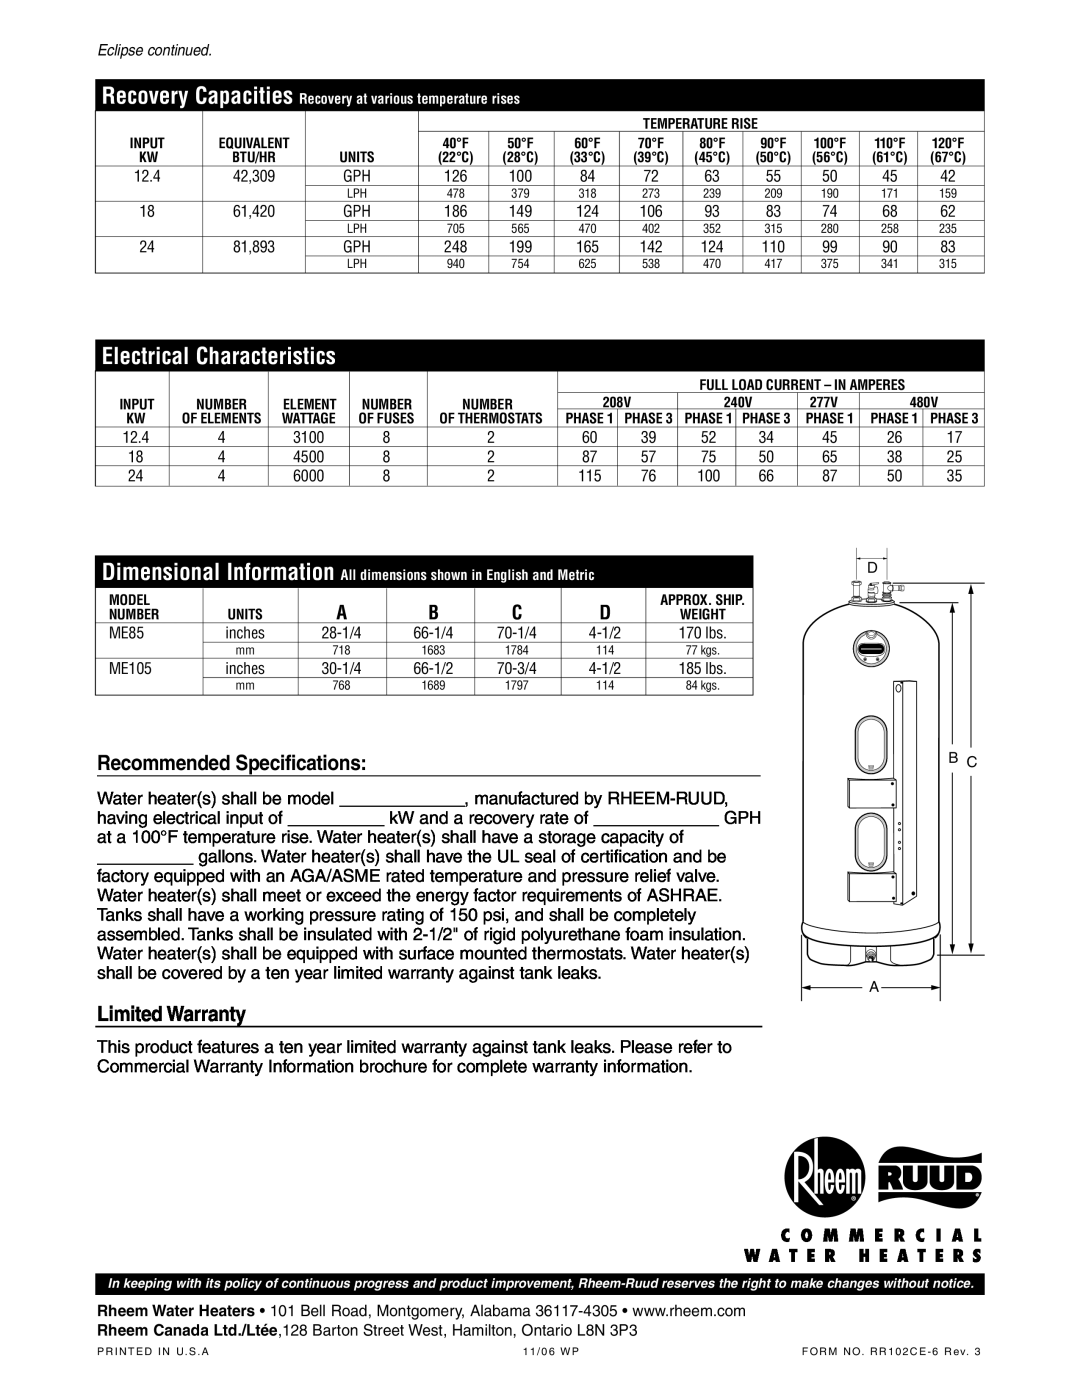 Rheem Electric Commercial Water Heater warranty Recommended Specifications, Limited Warranty, Electrical Characteristics 